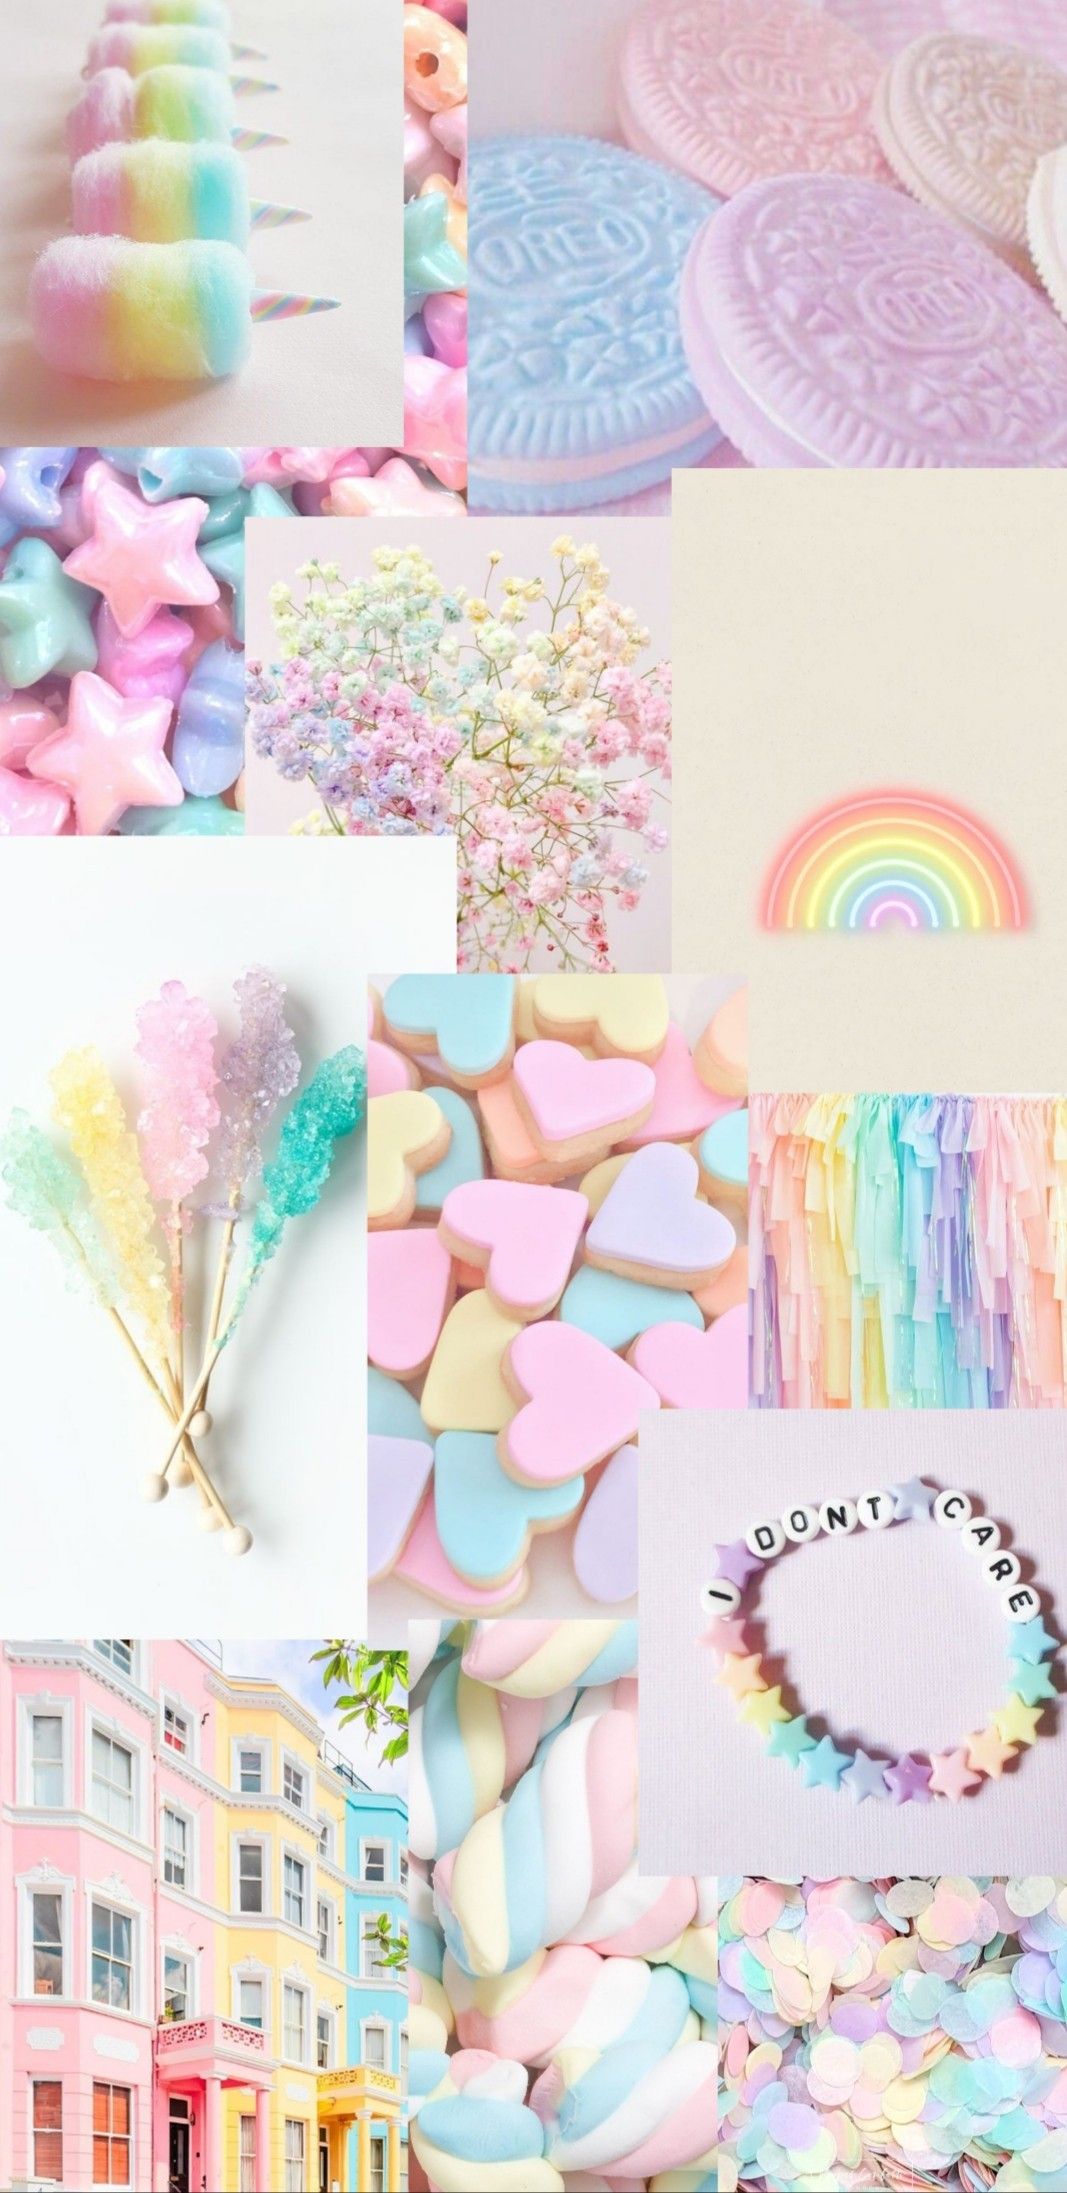 Pastel Rainbow Pictures  Download Free Images on Unsplash